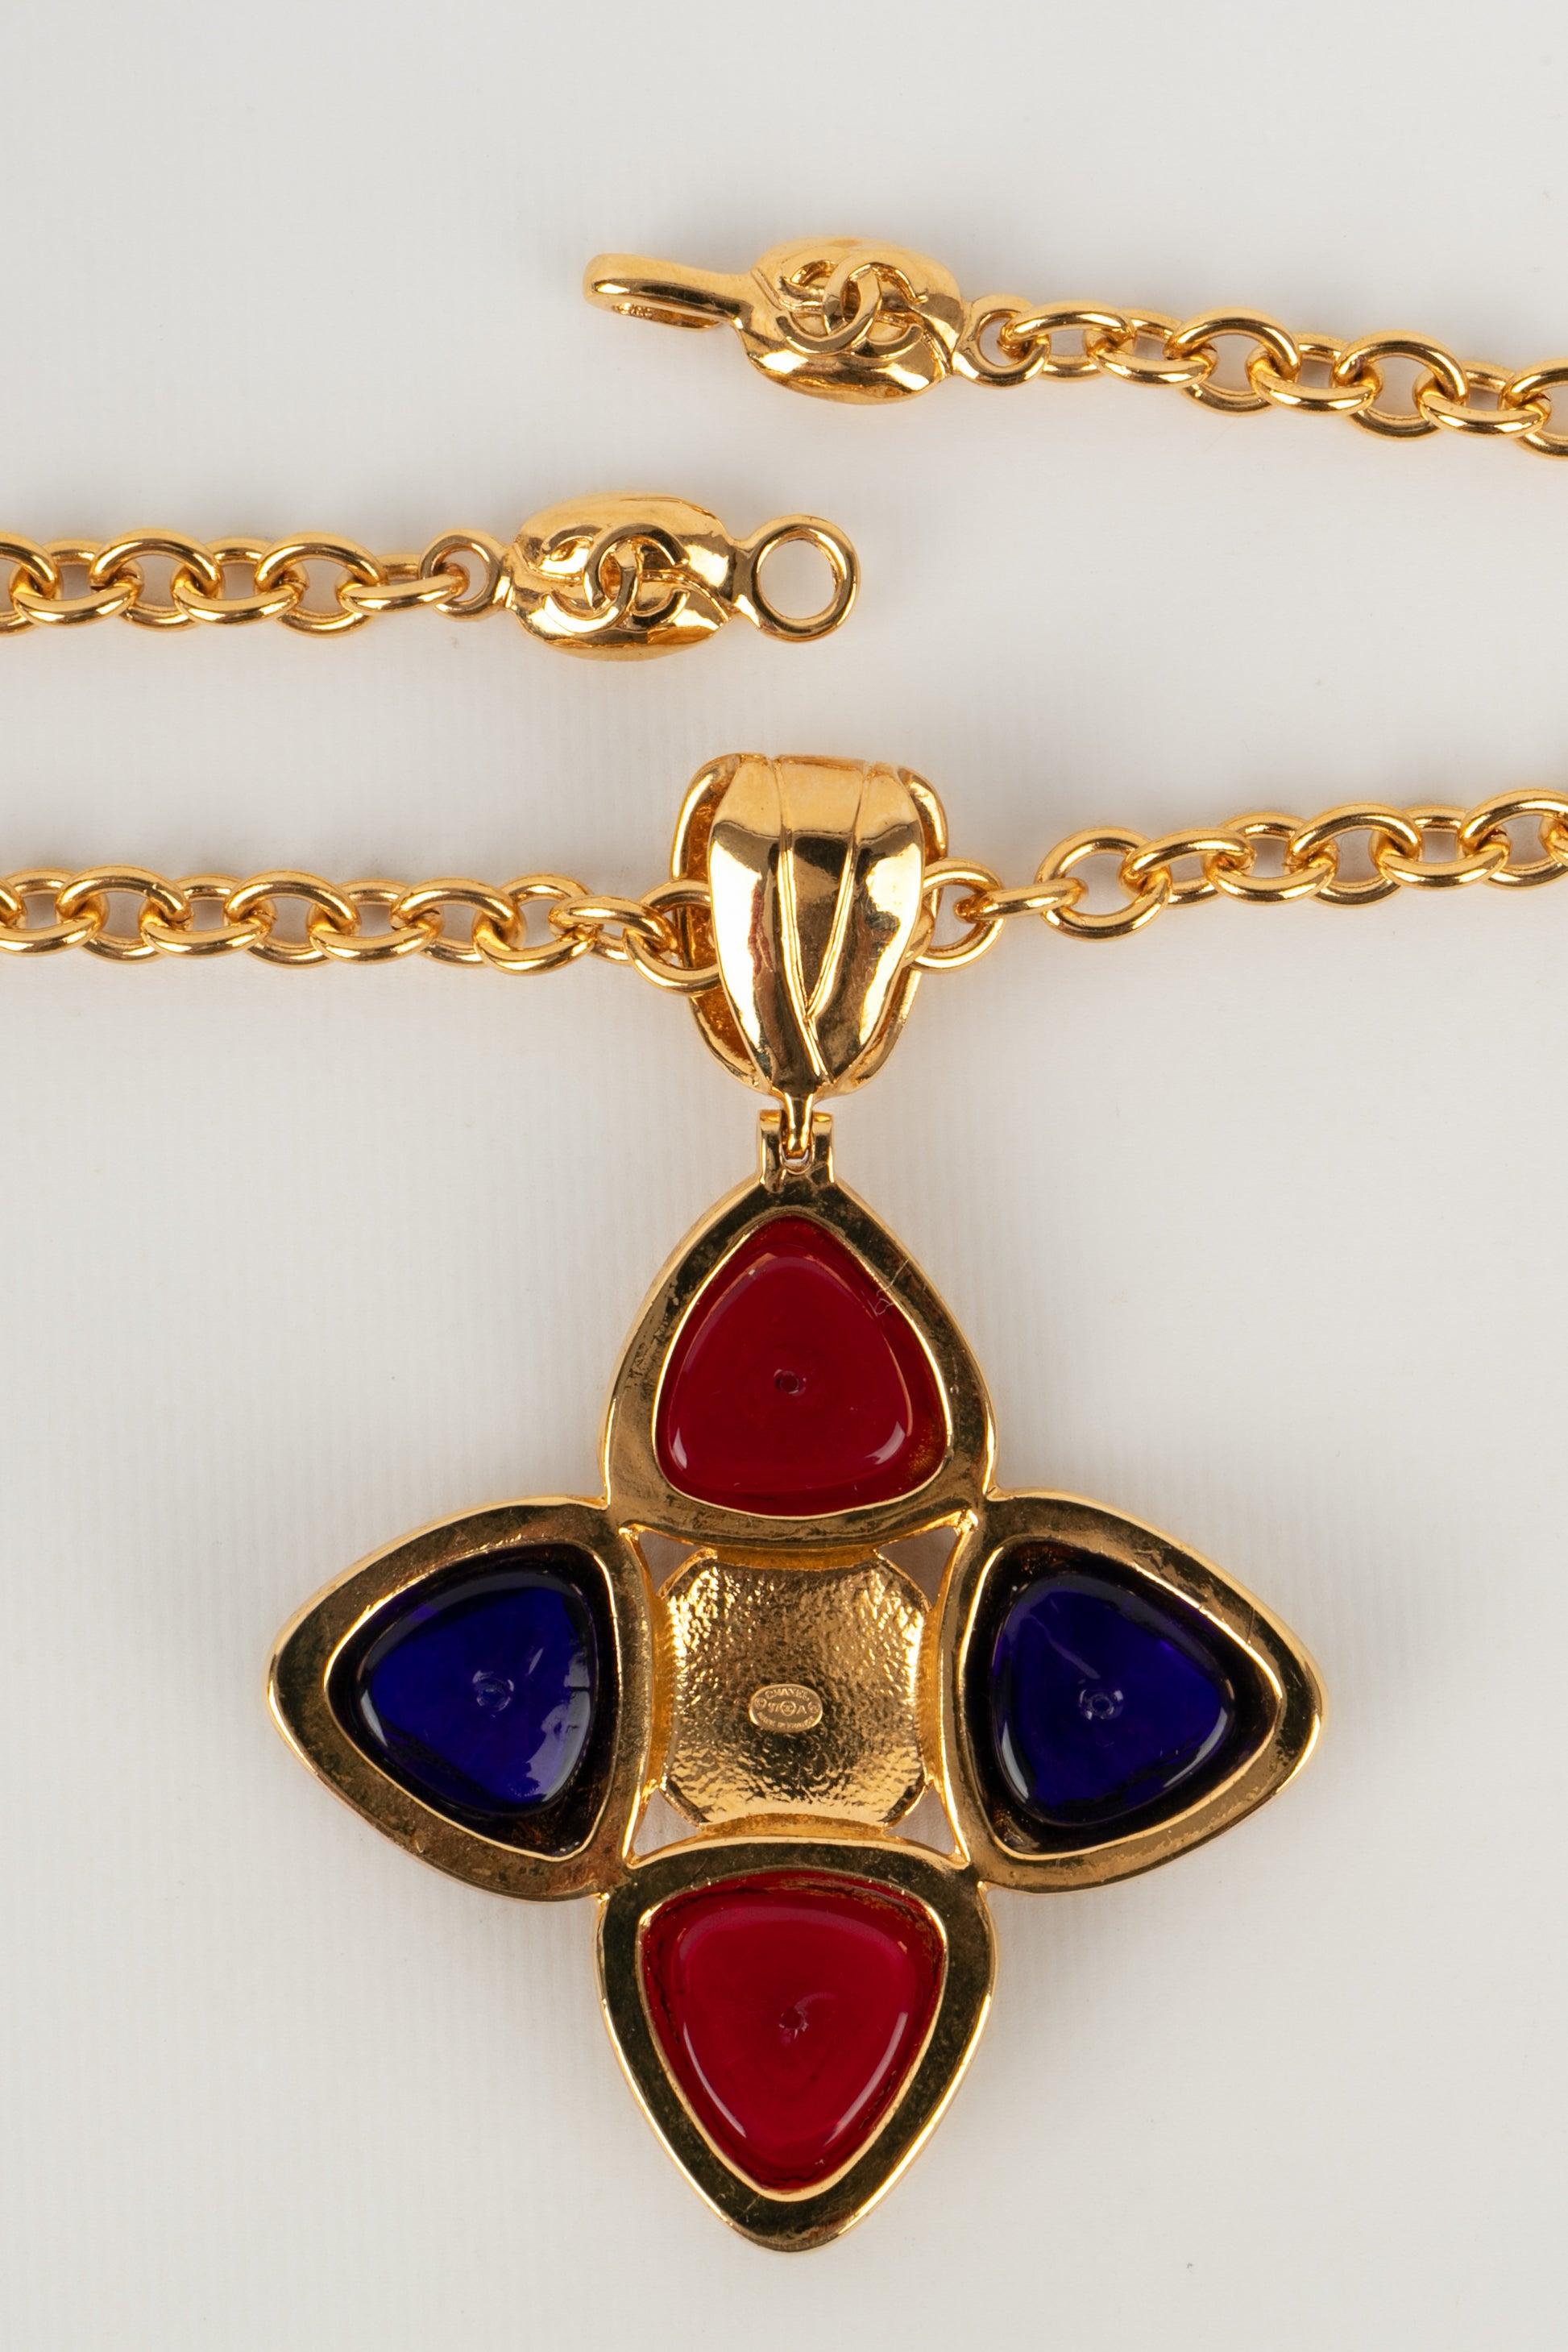 Women's Chanel Golden Metal Necklace with a Blue and Red Glass Paste Pendant, 1997